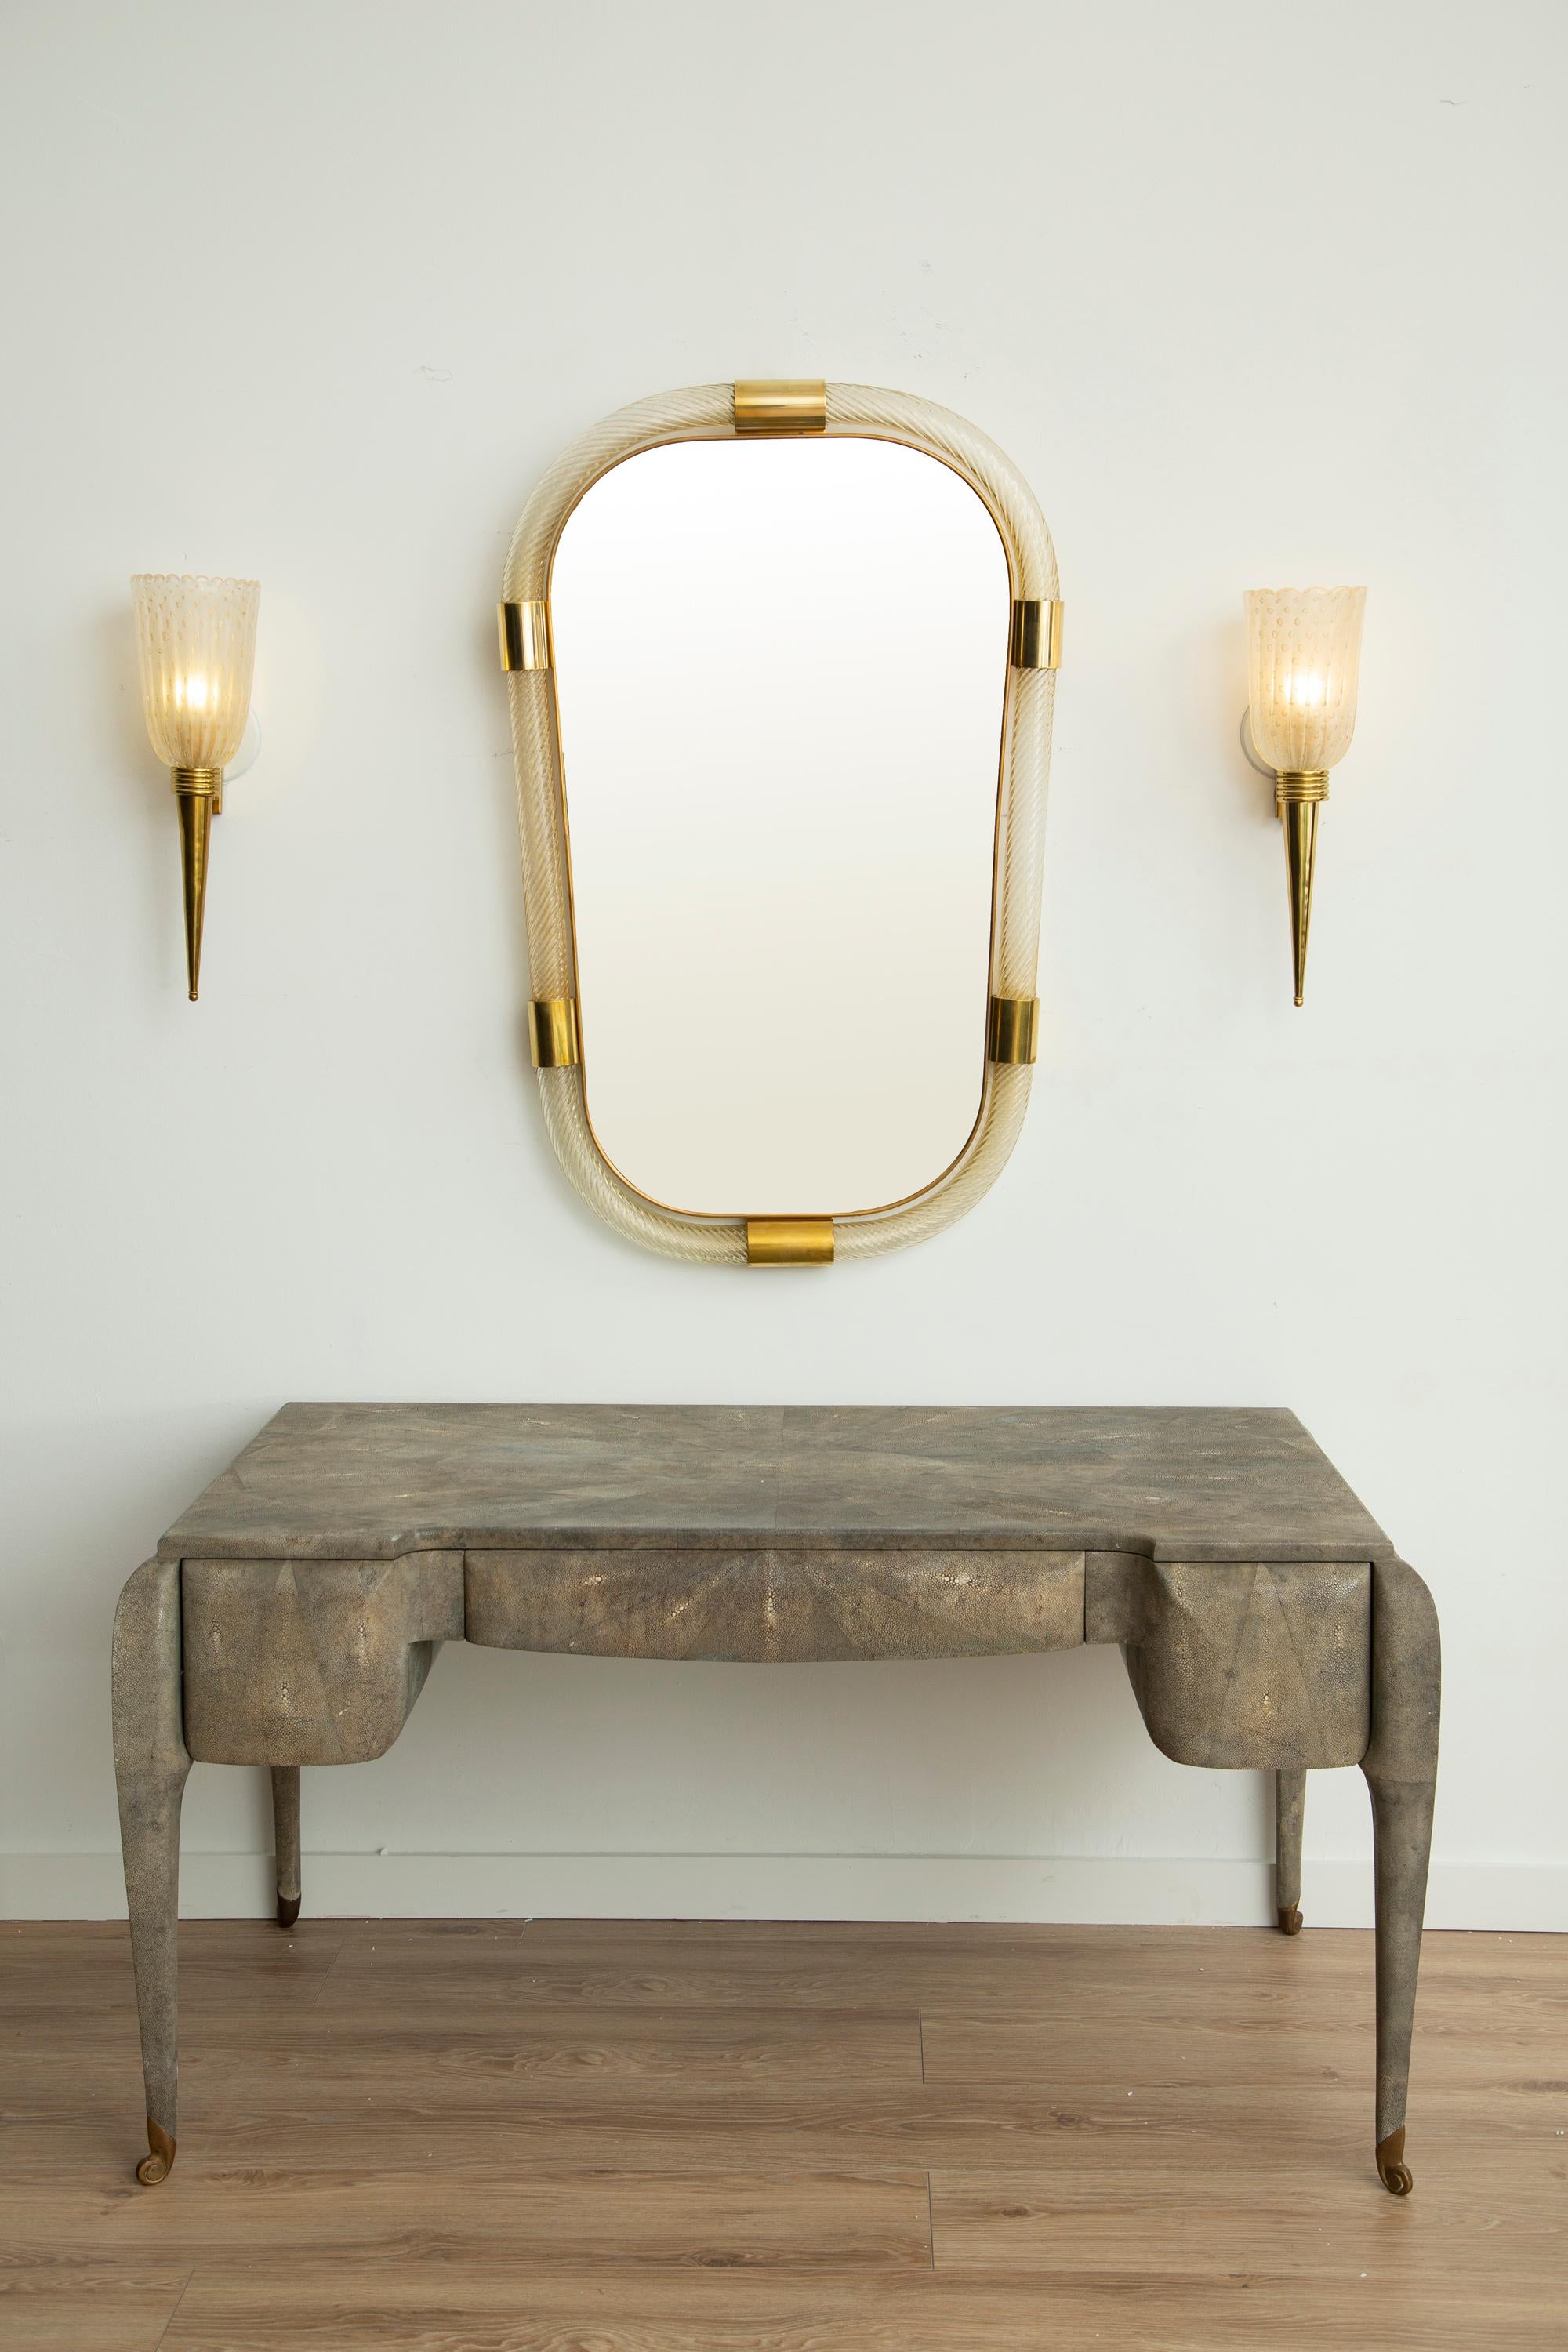 Contemporary twisted Murano glass and brass frame mirror, in stock
Light gold/ yellow with solid brass accent
Inner thin brass gallery
Handcrafted by a team of artisans in Venice, Italy.
Located in our store in Miami ready for shipping.
Pair